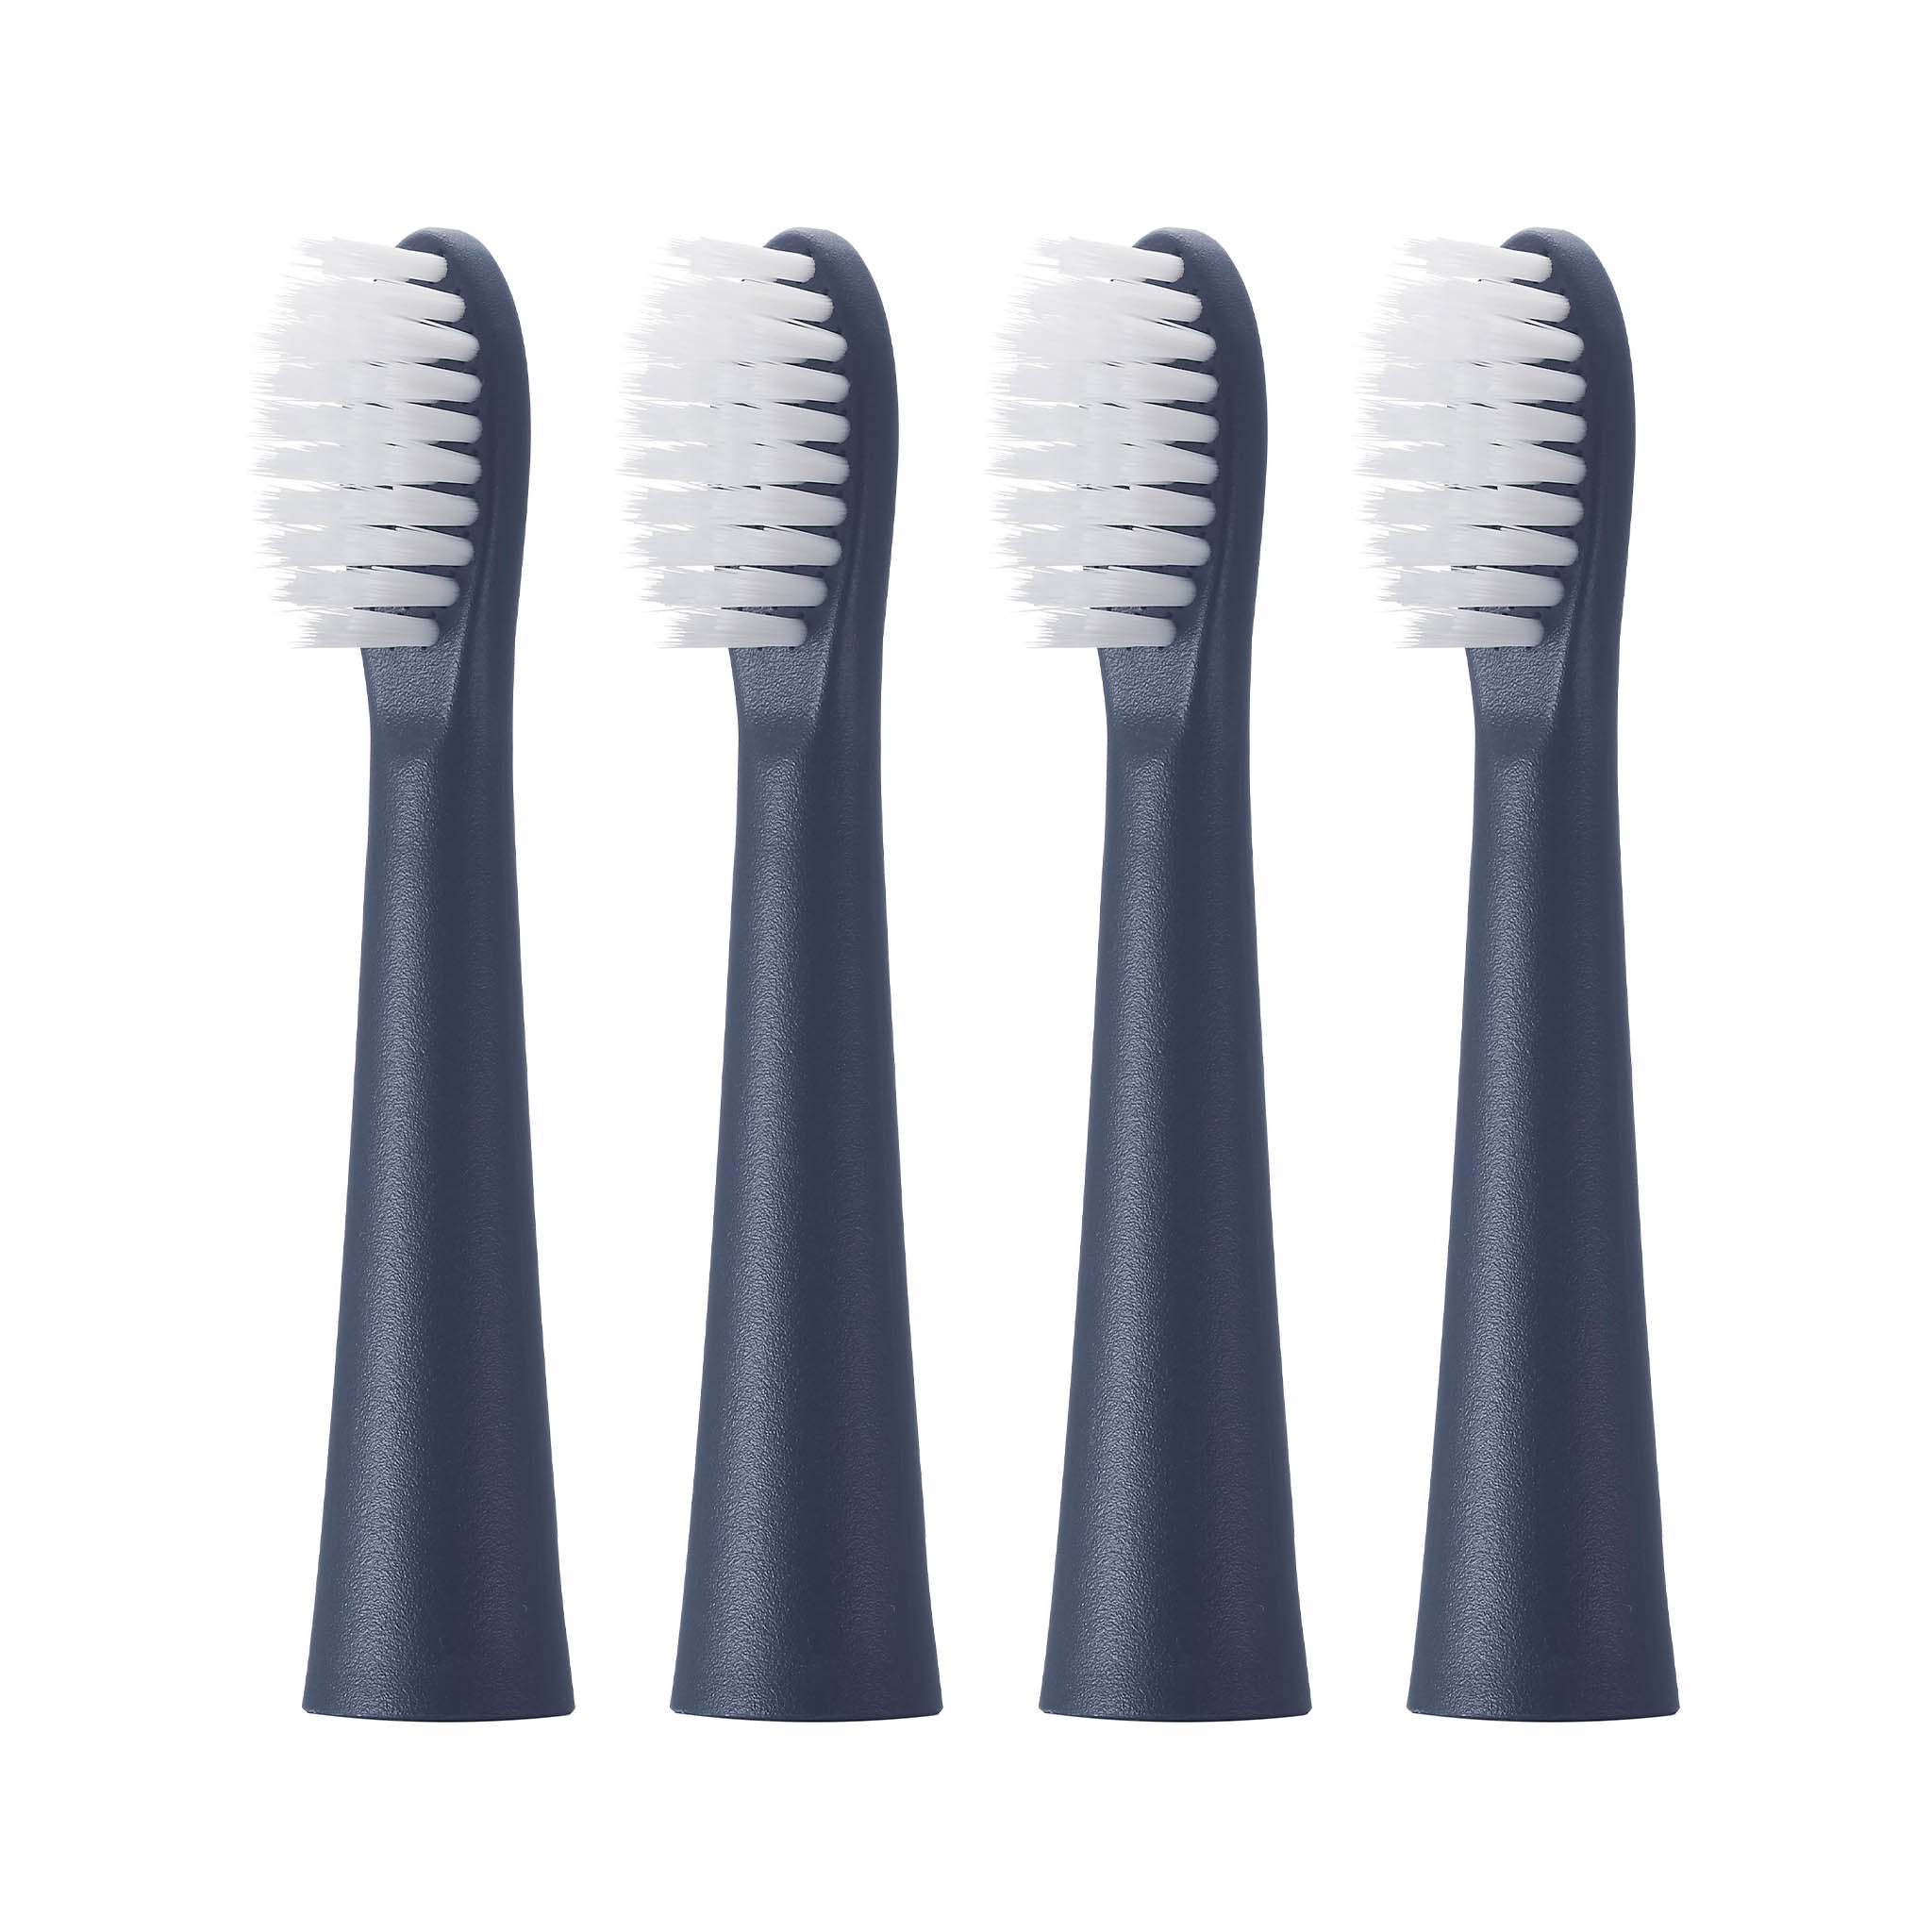 Extra-fine Replacement Toothbrushes (4 count)